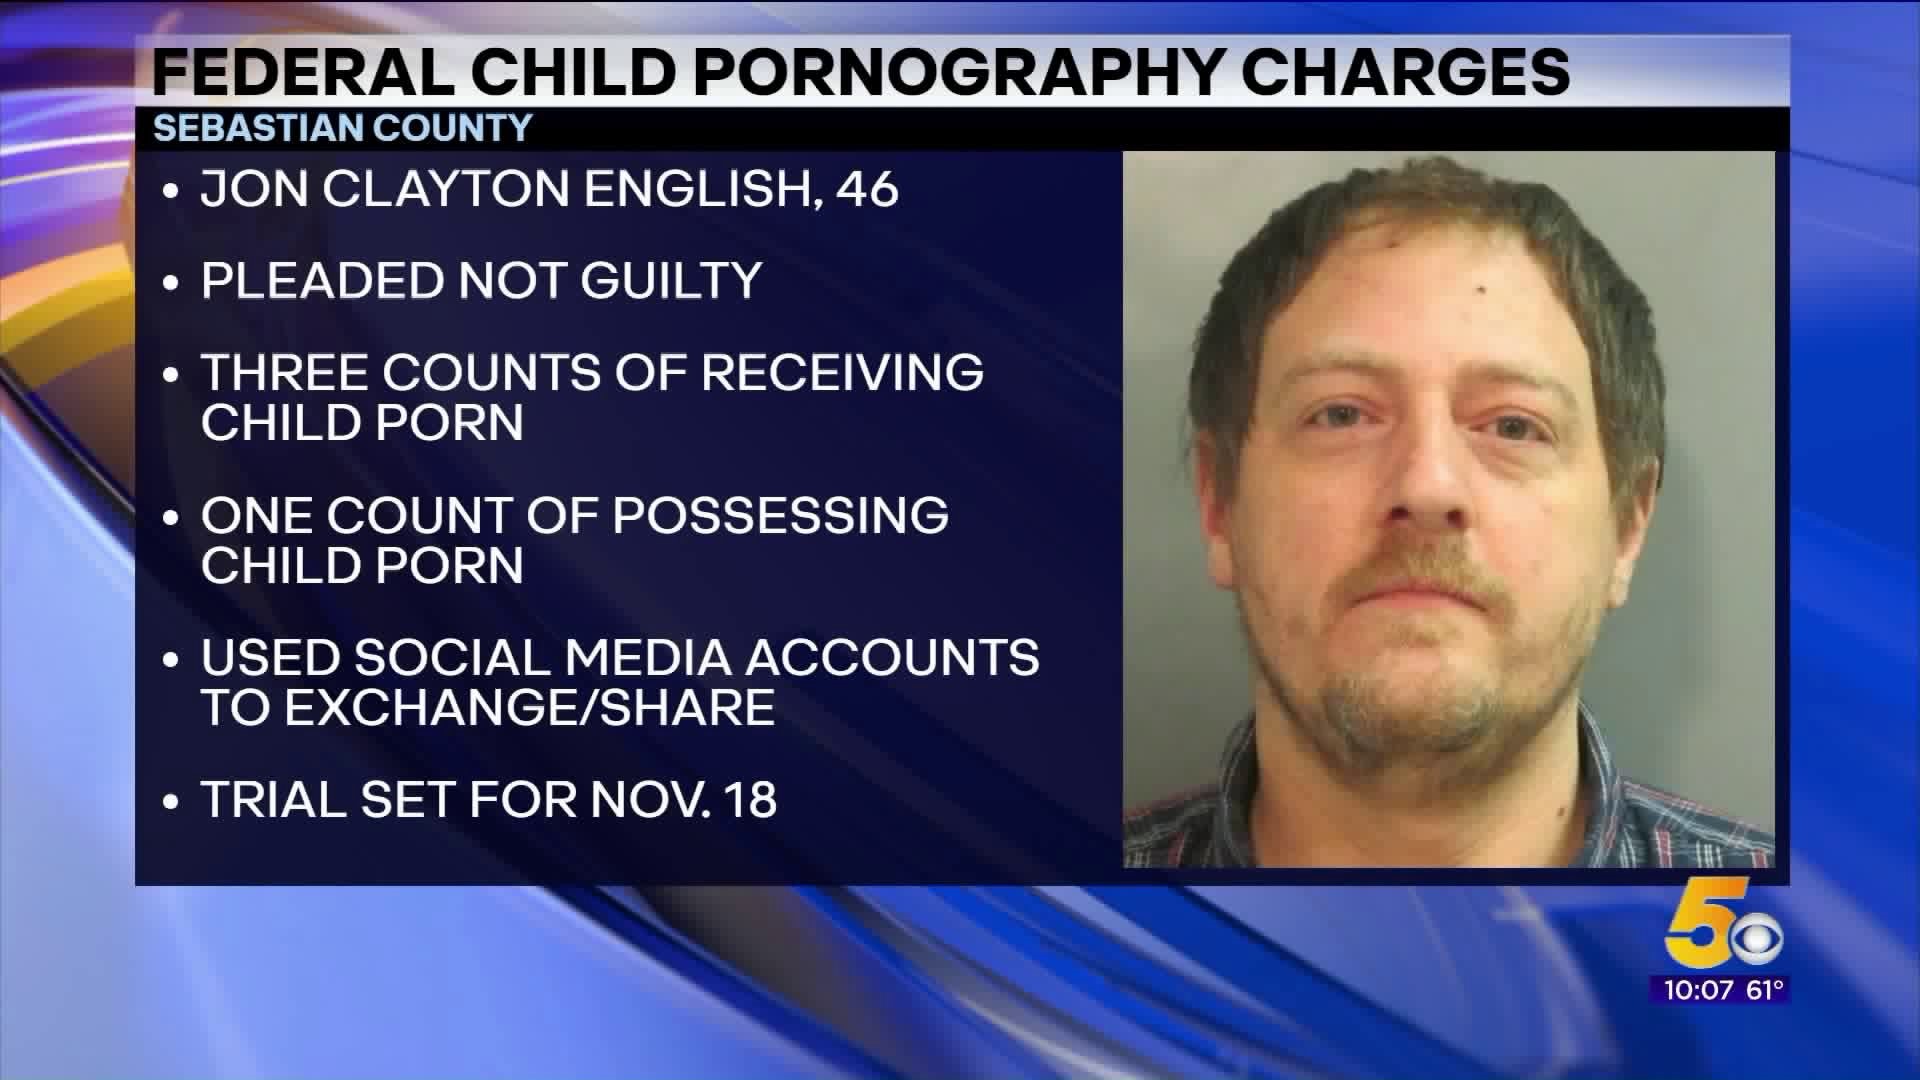 Feds: Harrison Man Chatted Online About Harming Young Boys